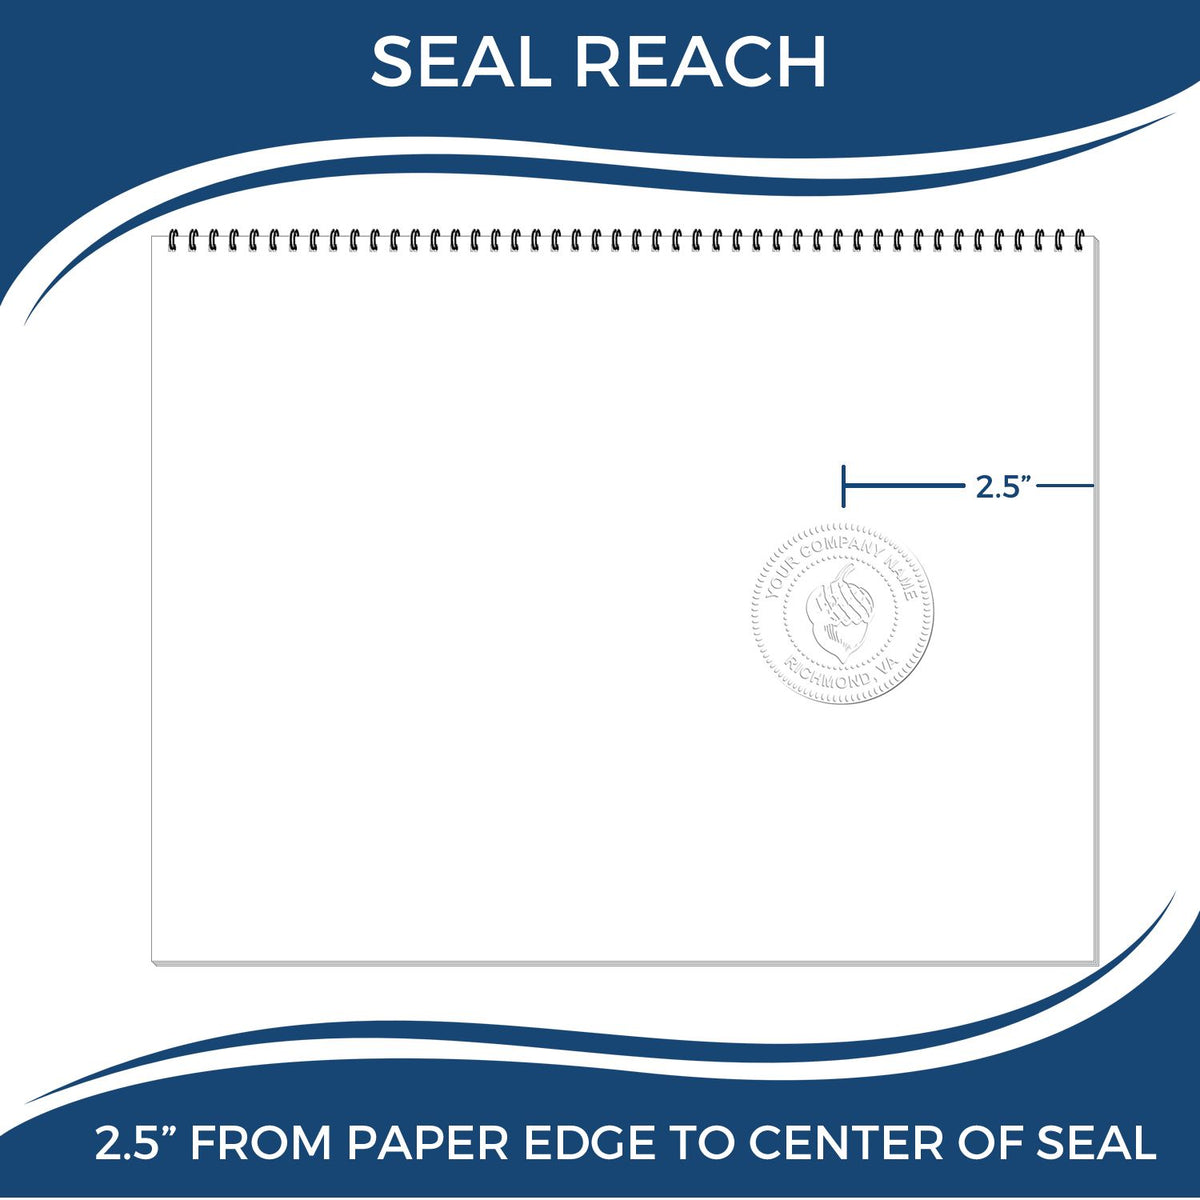 An infographic showing the seal reach which is represented by a ruler and a miniature seal image of the Heavy Duty Cast Iron Delaware Architect Embosser